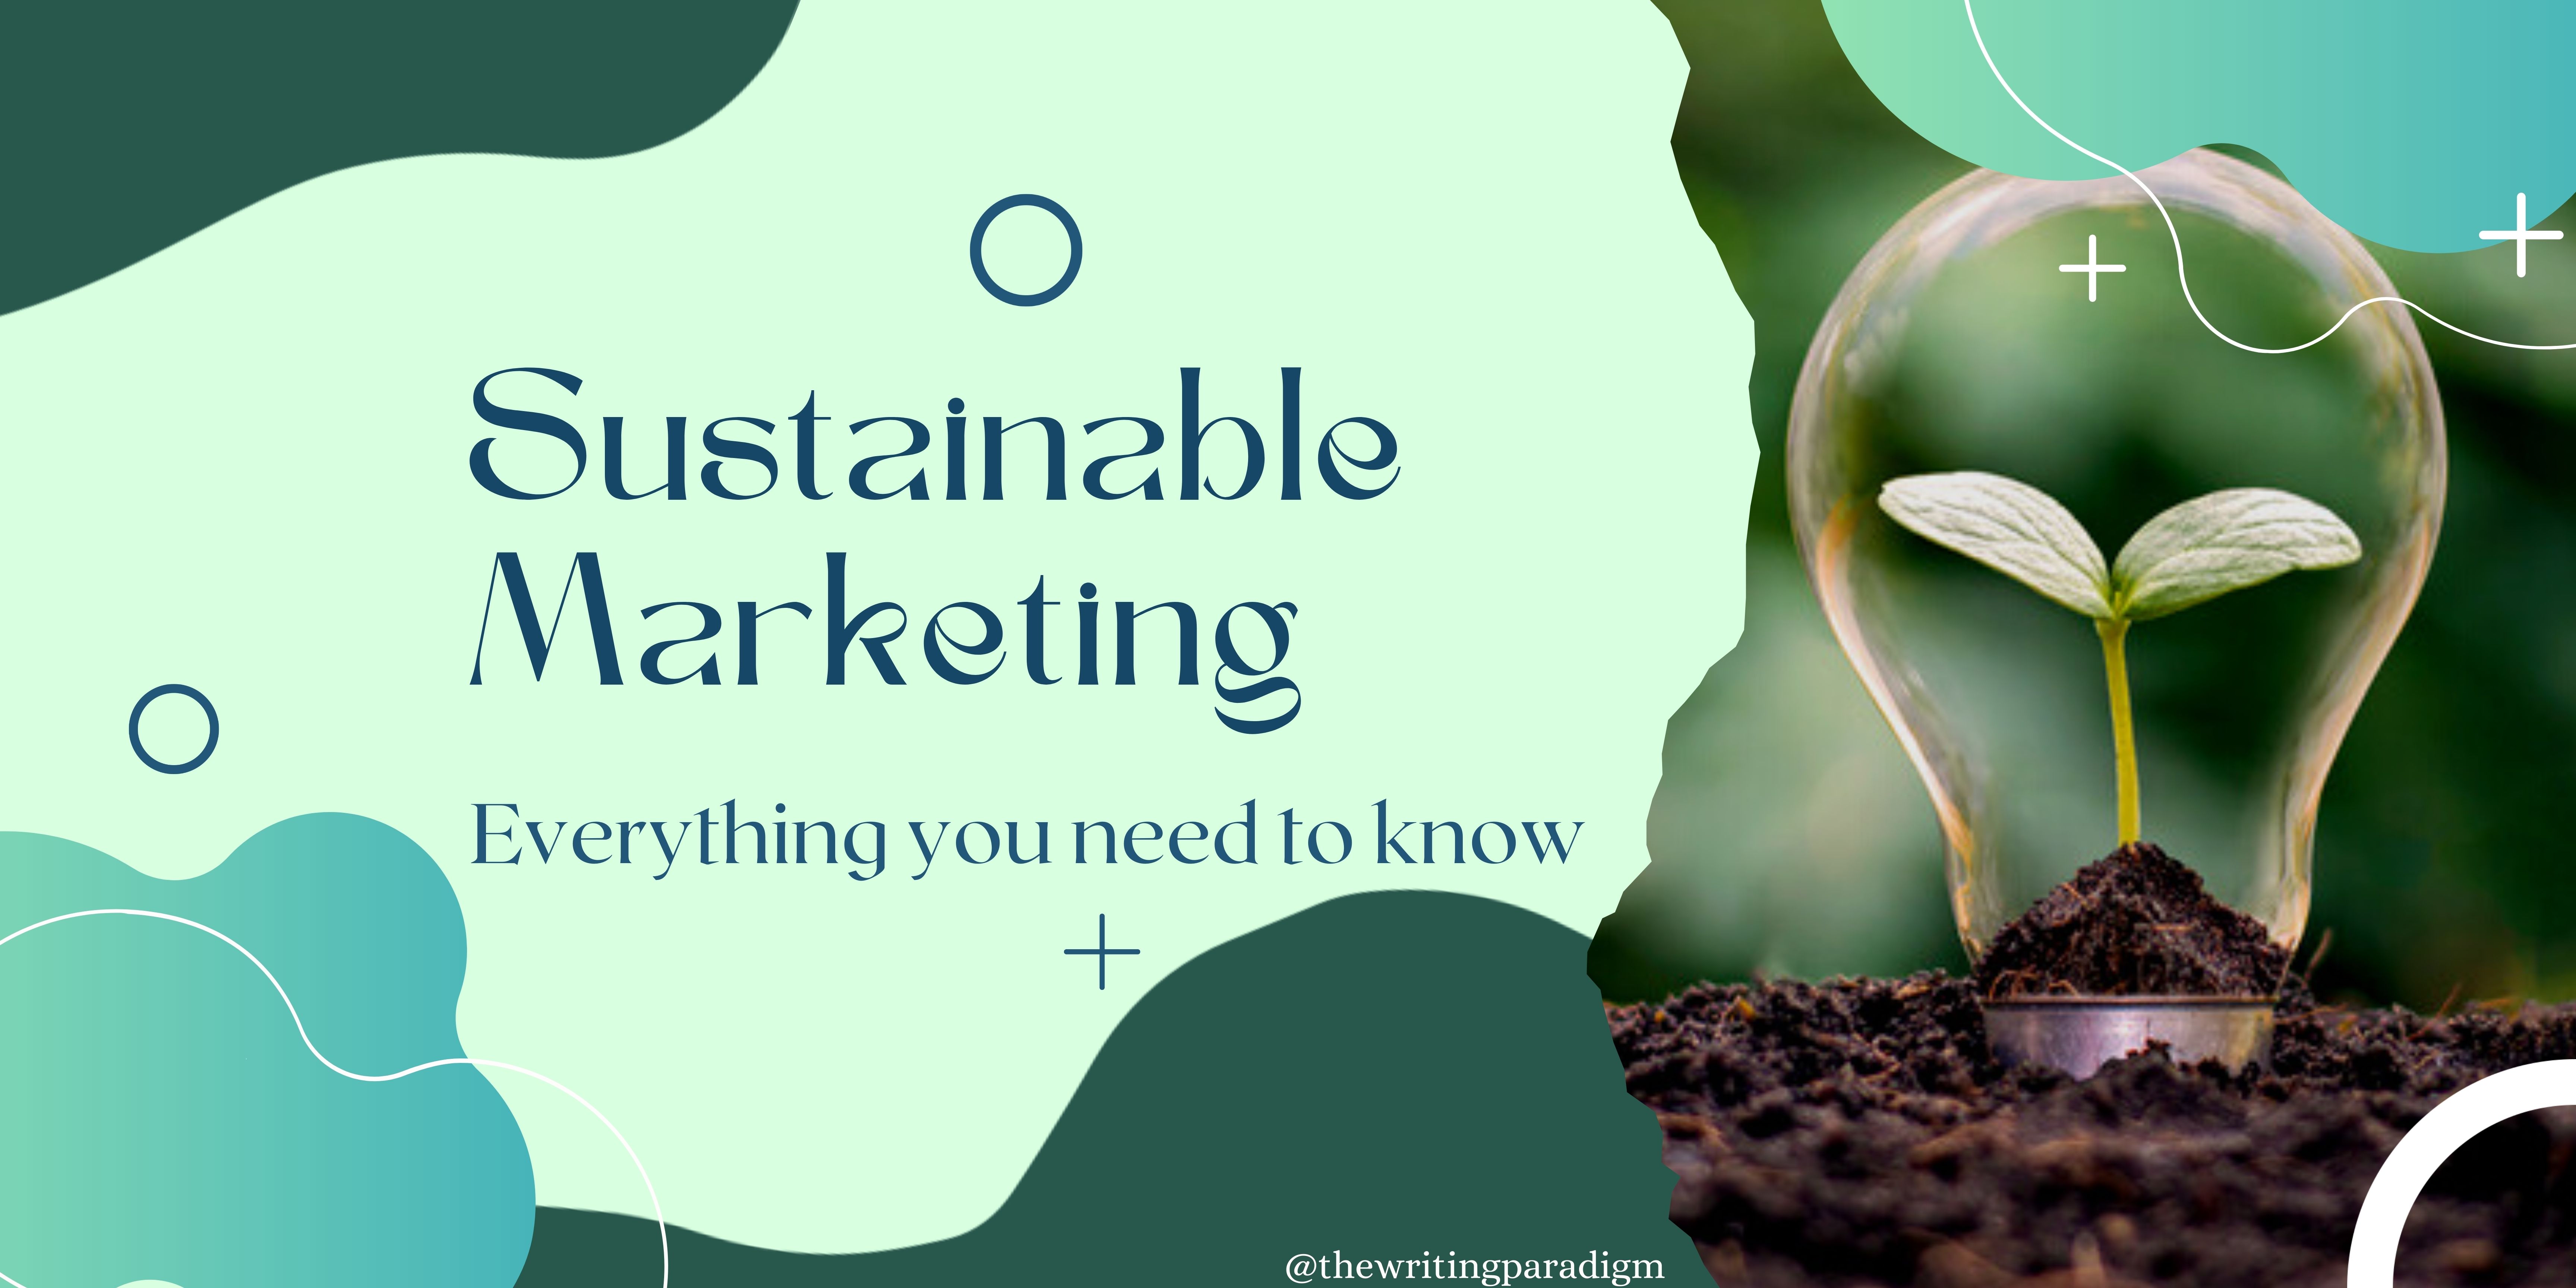 Sustainable Marketing Everything you need to know